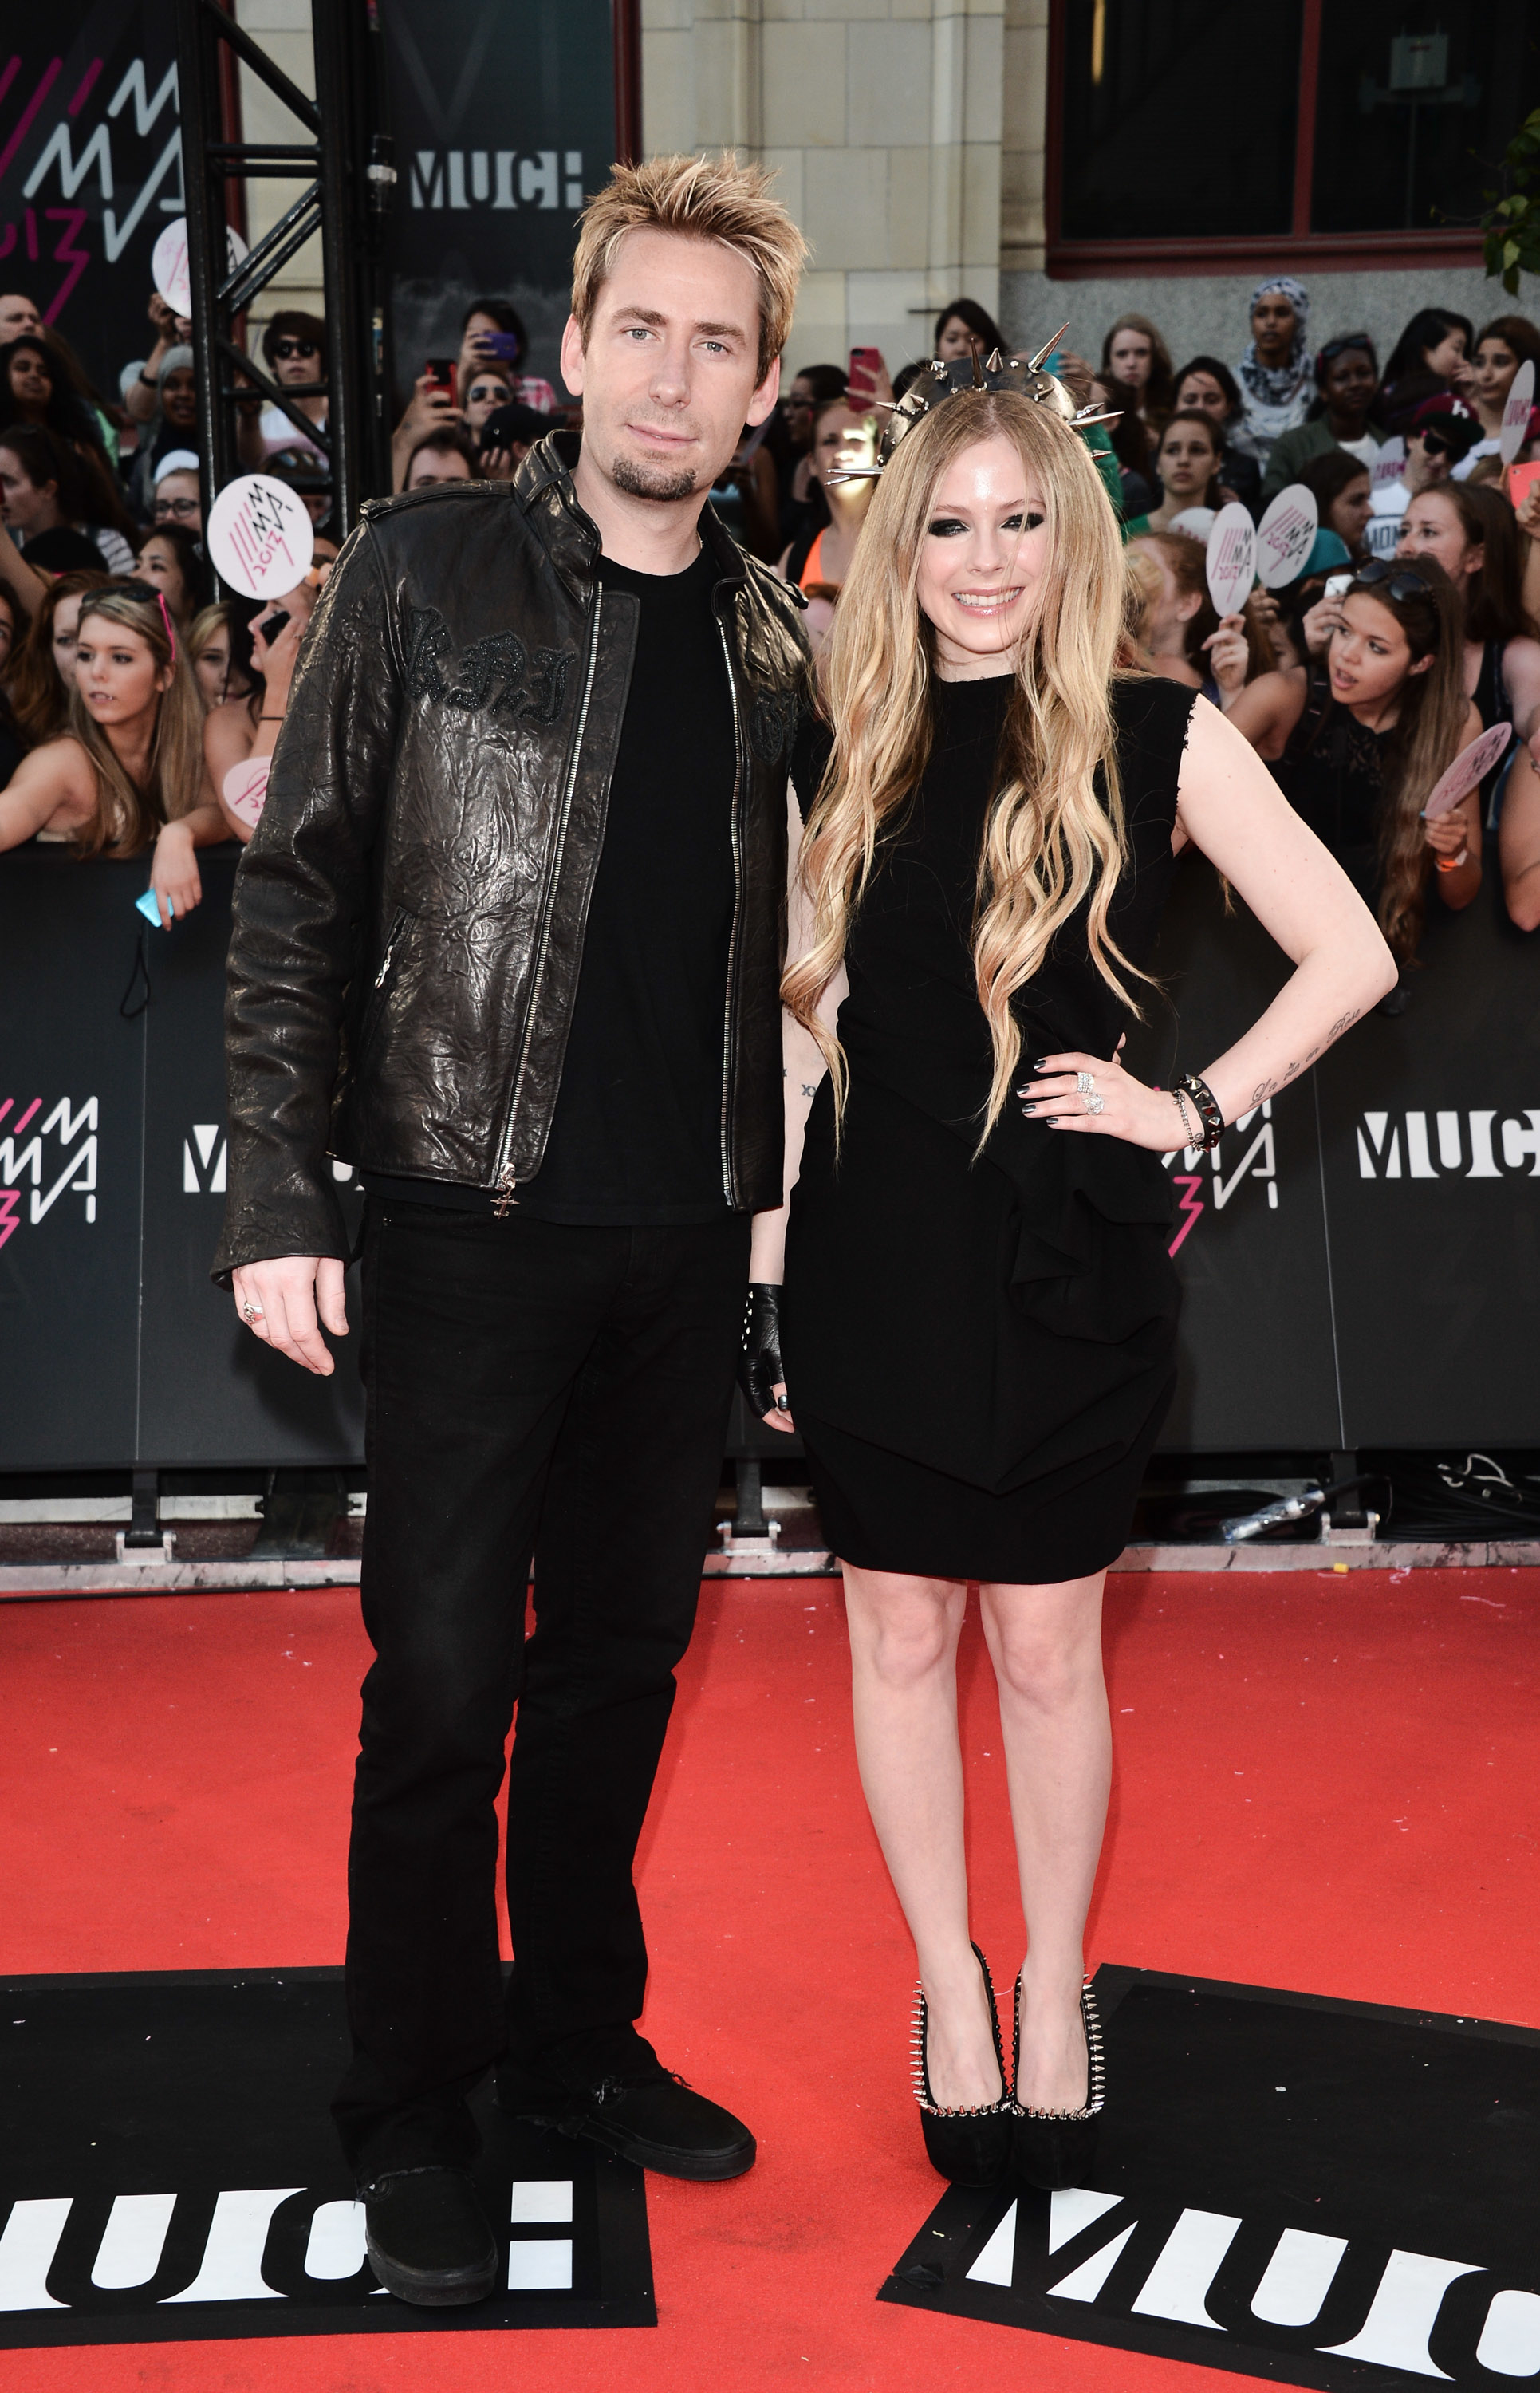 Chad Kroeger and Avril Lavigne on the MMVAs red carpet.